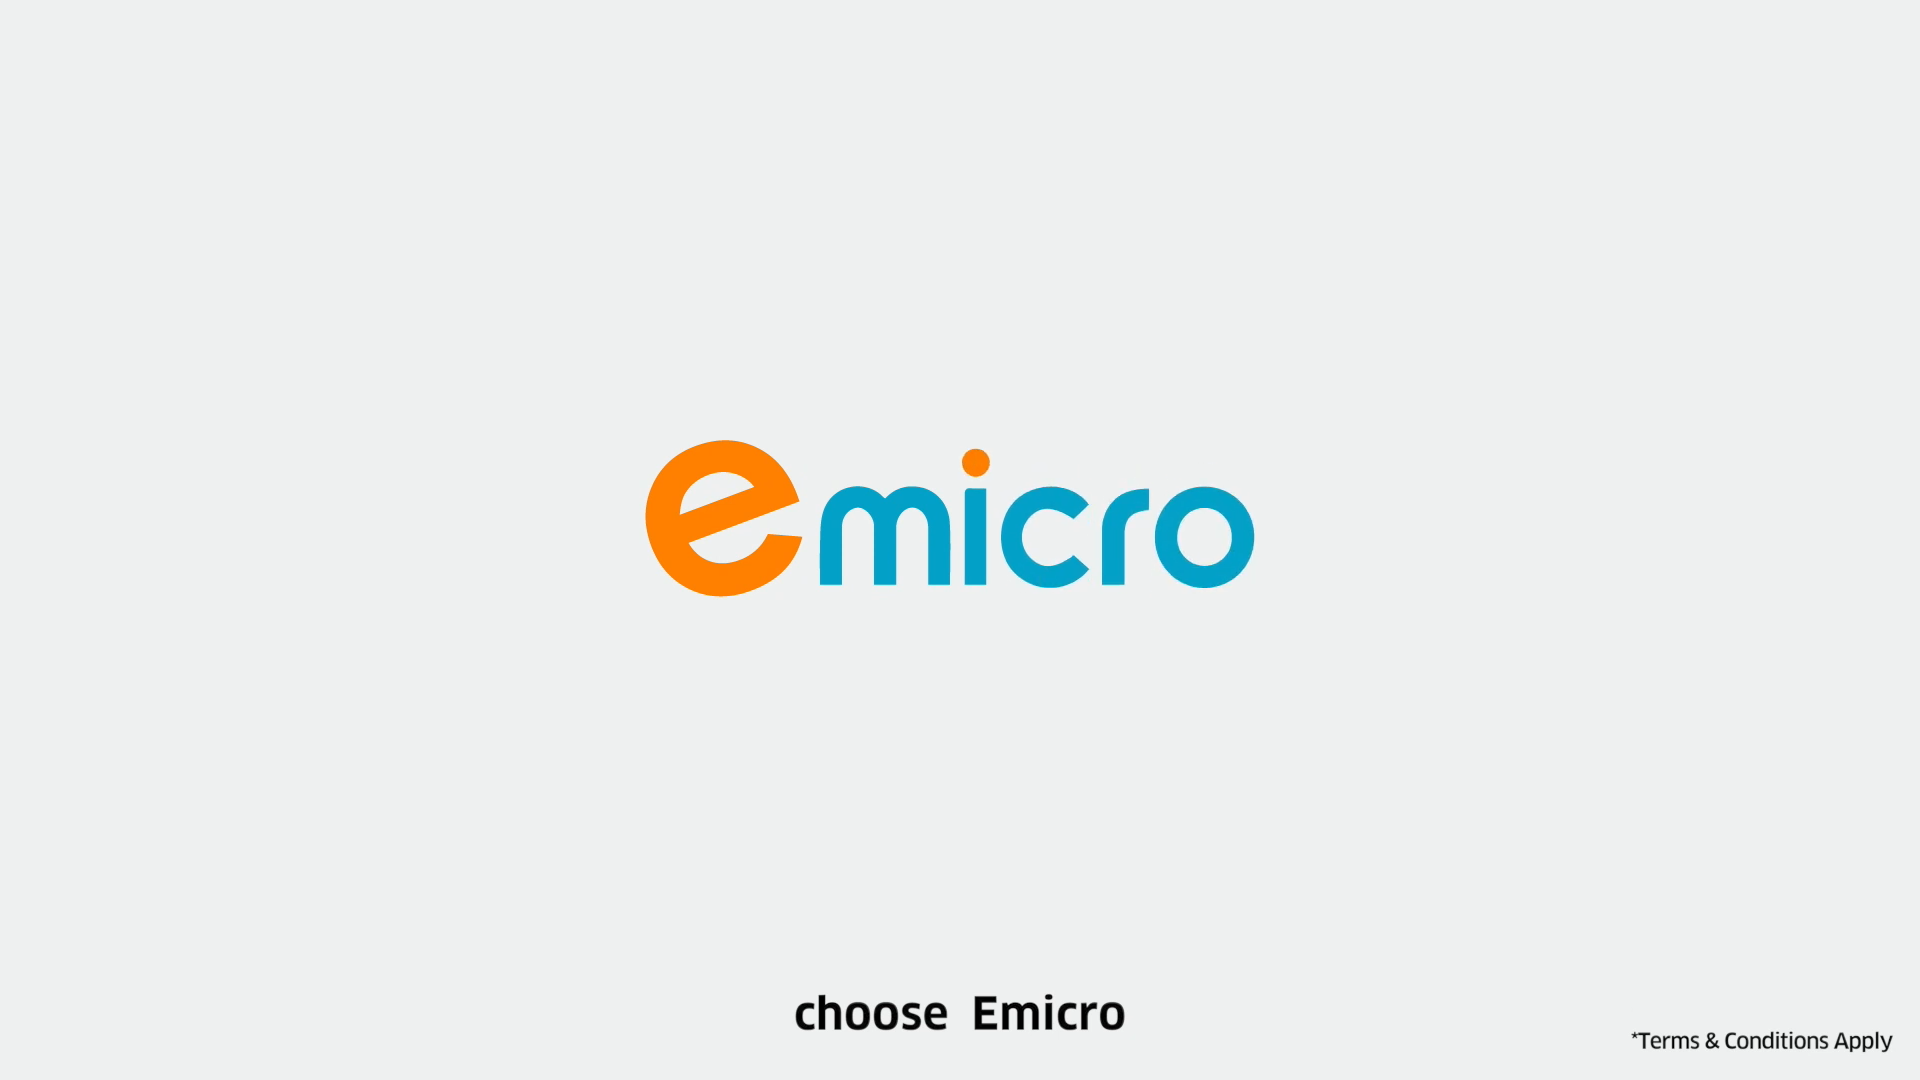 Emicro Instant Loan Malaysia - Apply Now - Instant Cash Loan In 1 Hour Malaysia